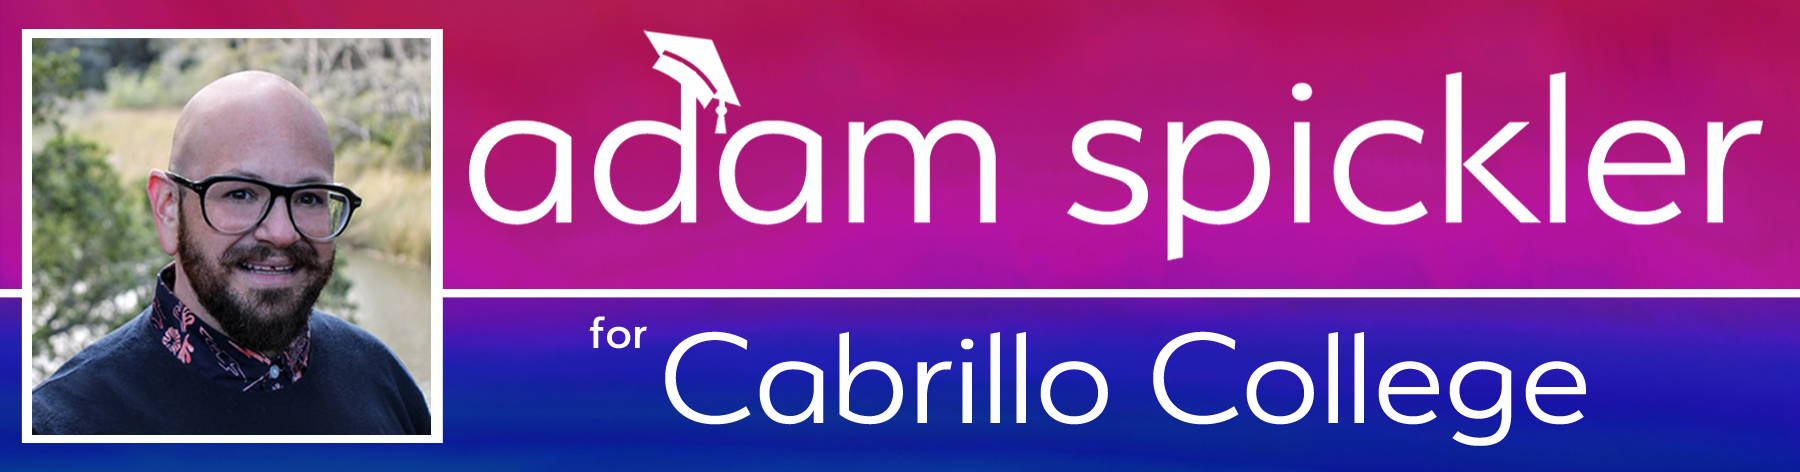 Image of Adam Spickler for Cabrillo College Trustee in a pink and blue logo